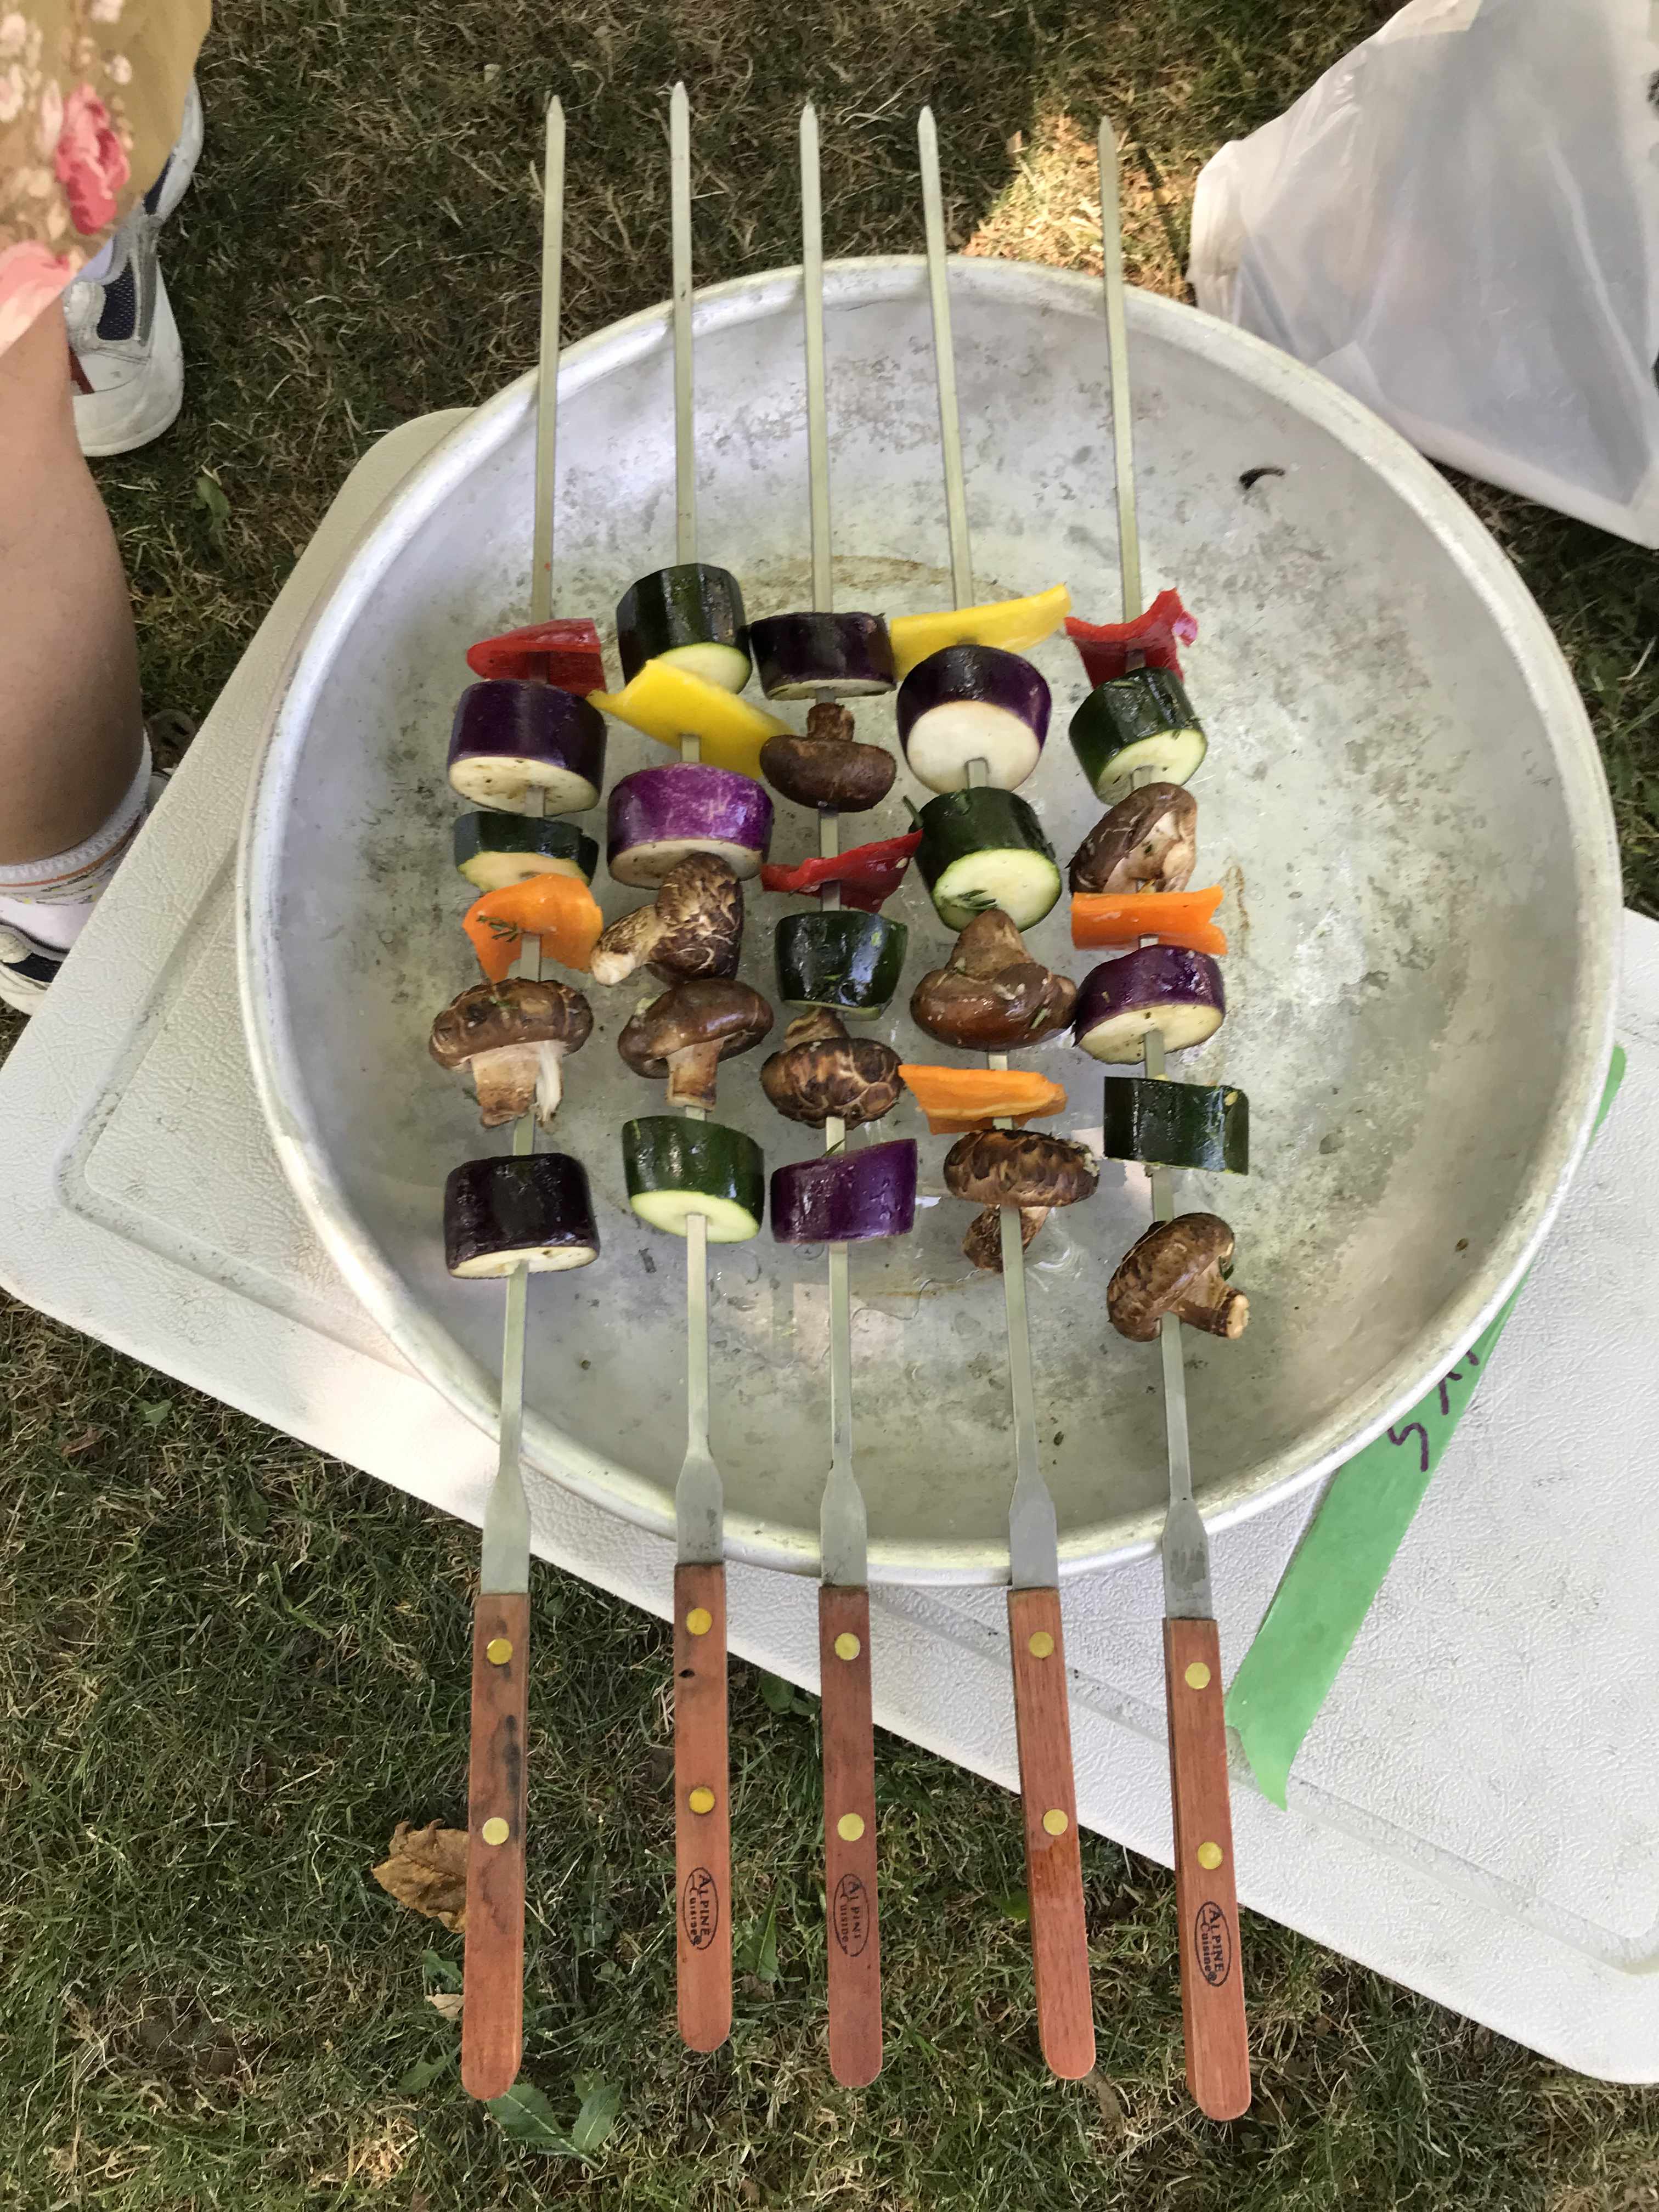 five shish kebabs skewers neatly laid out with peppers, eggplants, zucchini and mushrooms shiny with oil and specked with herb seasoning. they are resting on a large bowl, on top of a cooler on the grass.
